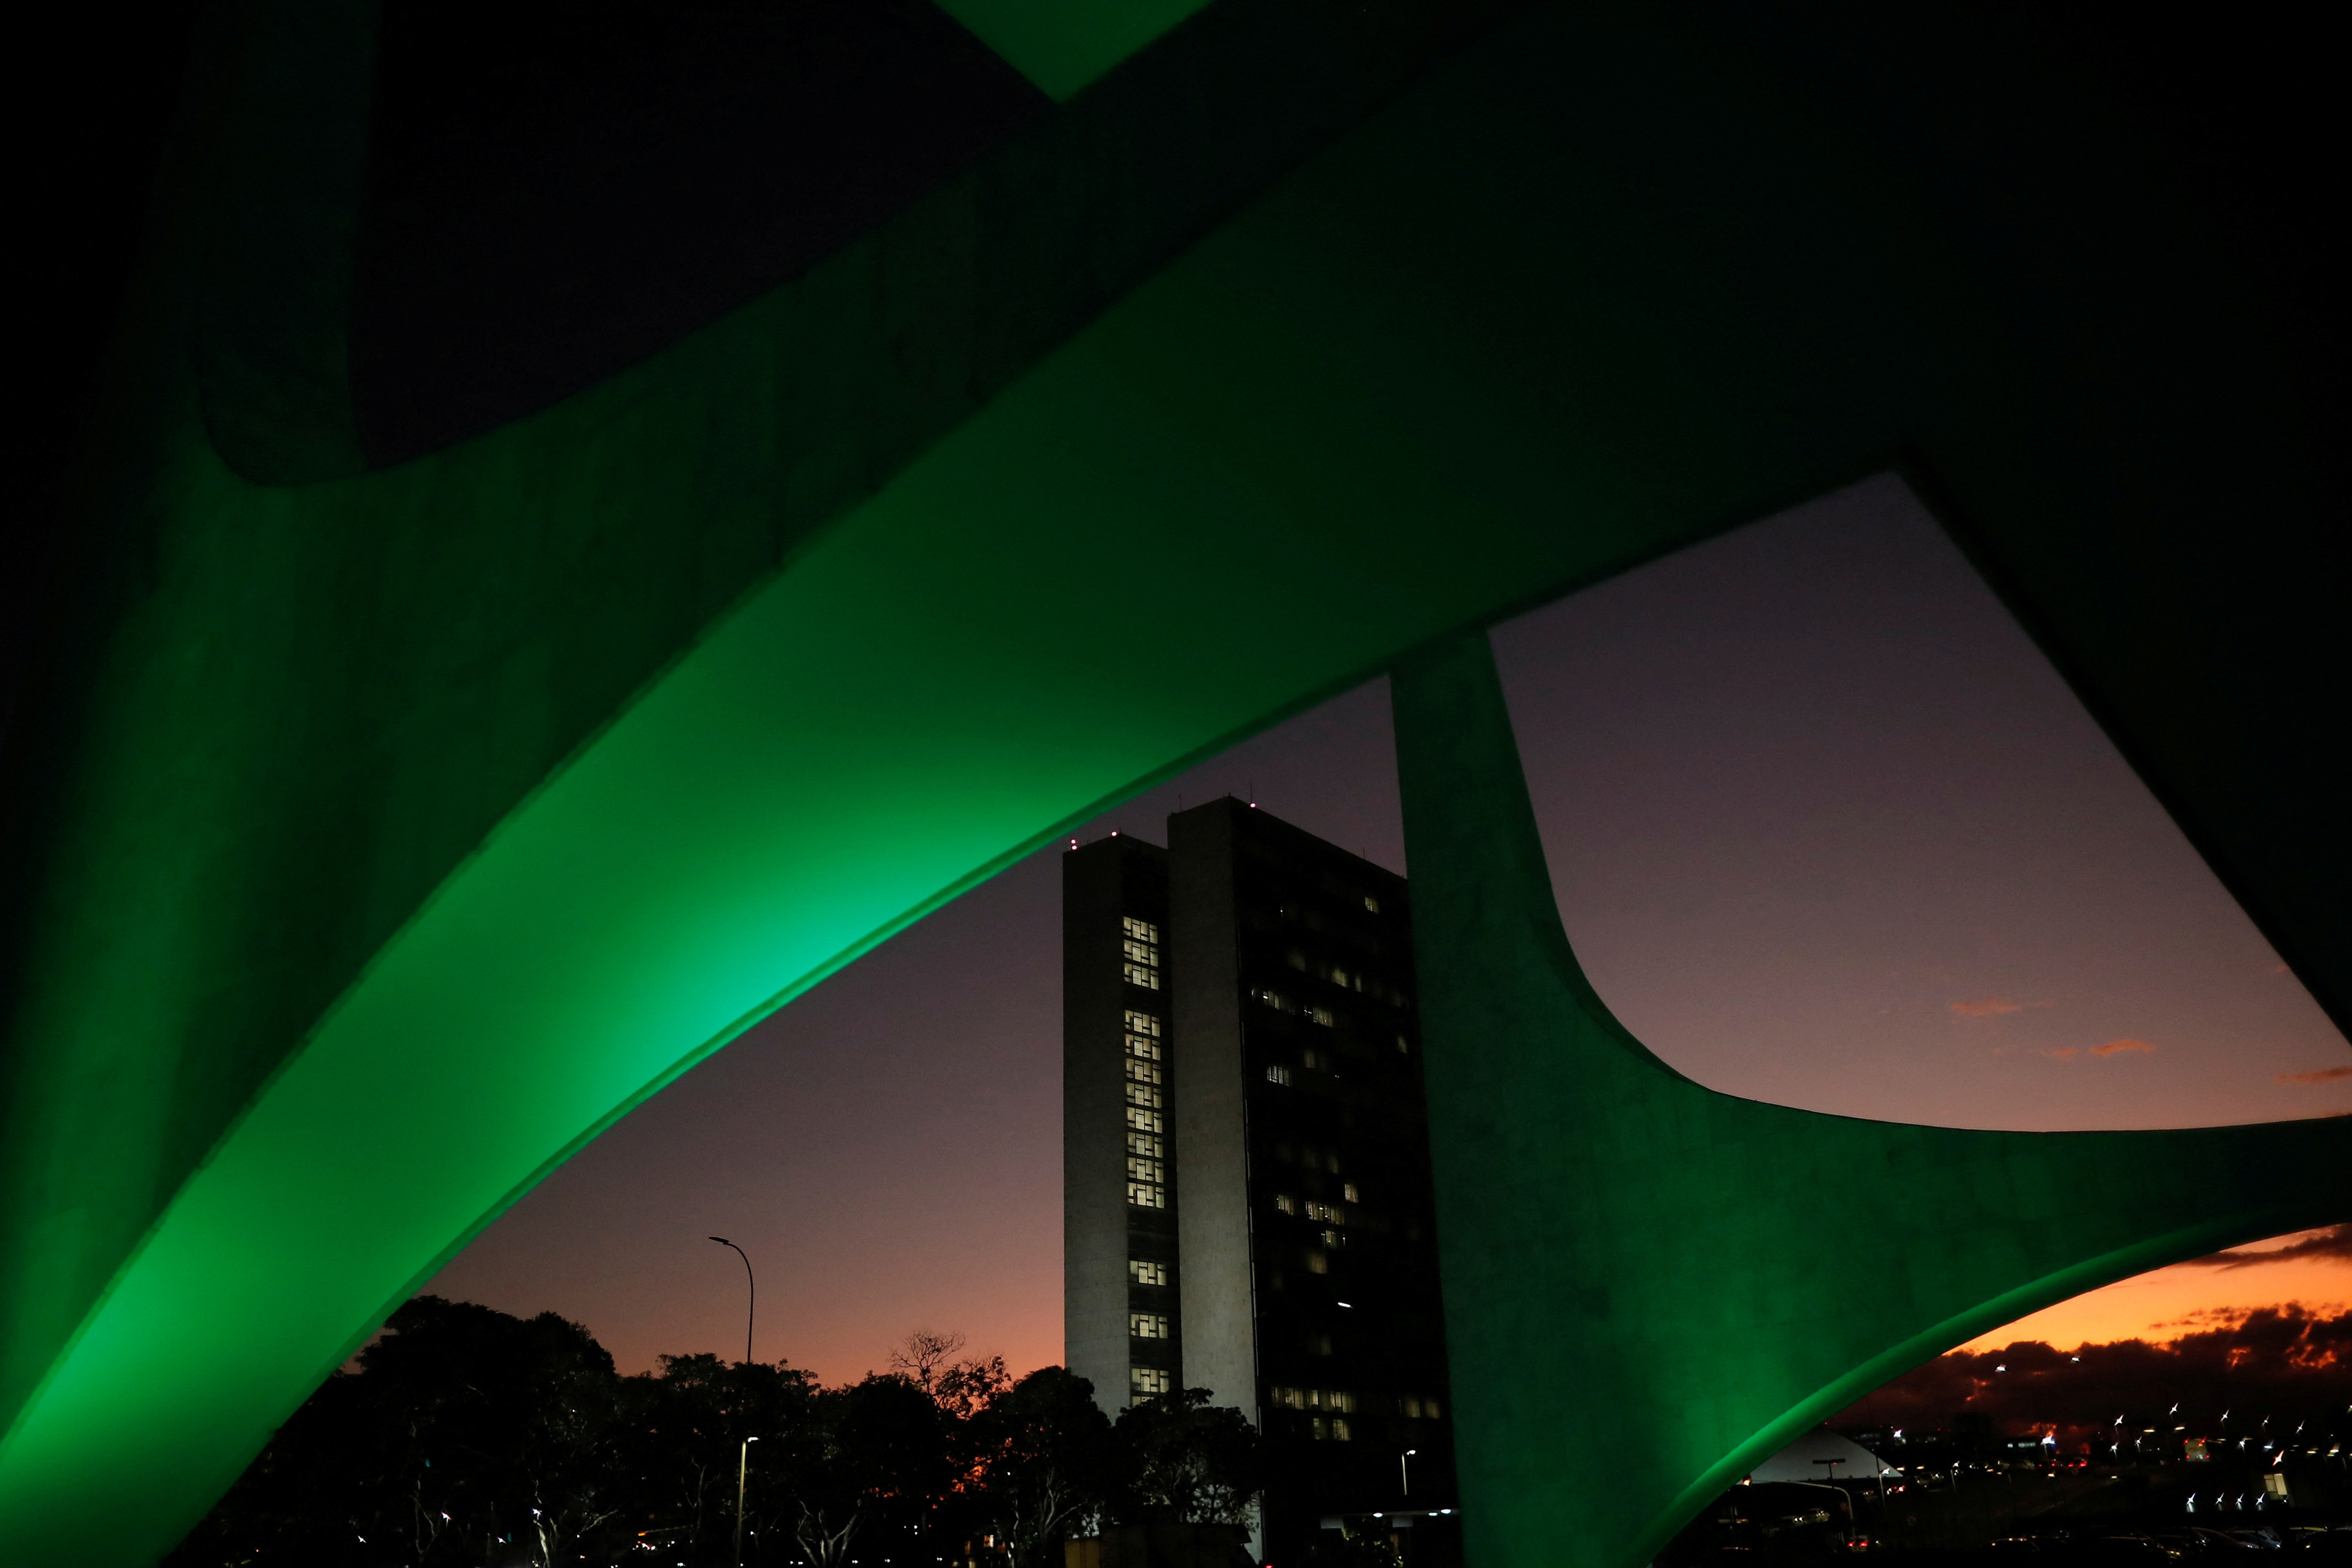 The national congress building is seen through architectural details of the Planalto Palace during sunrise in Brasilia